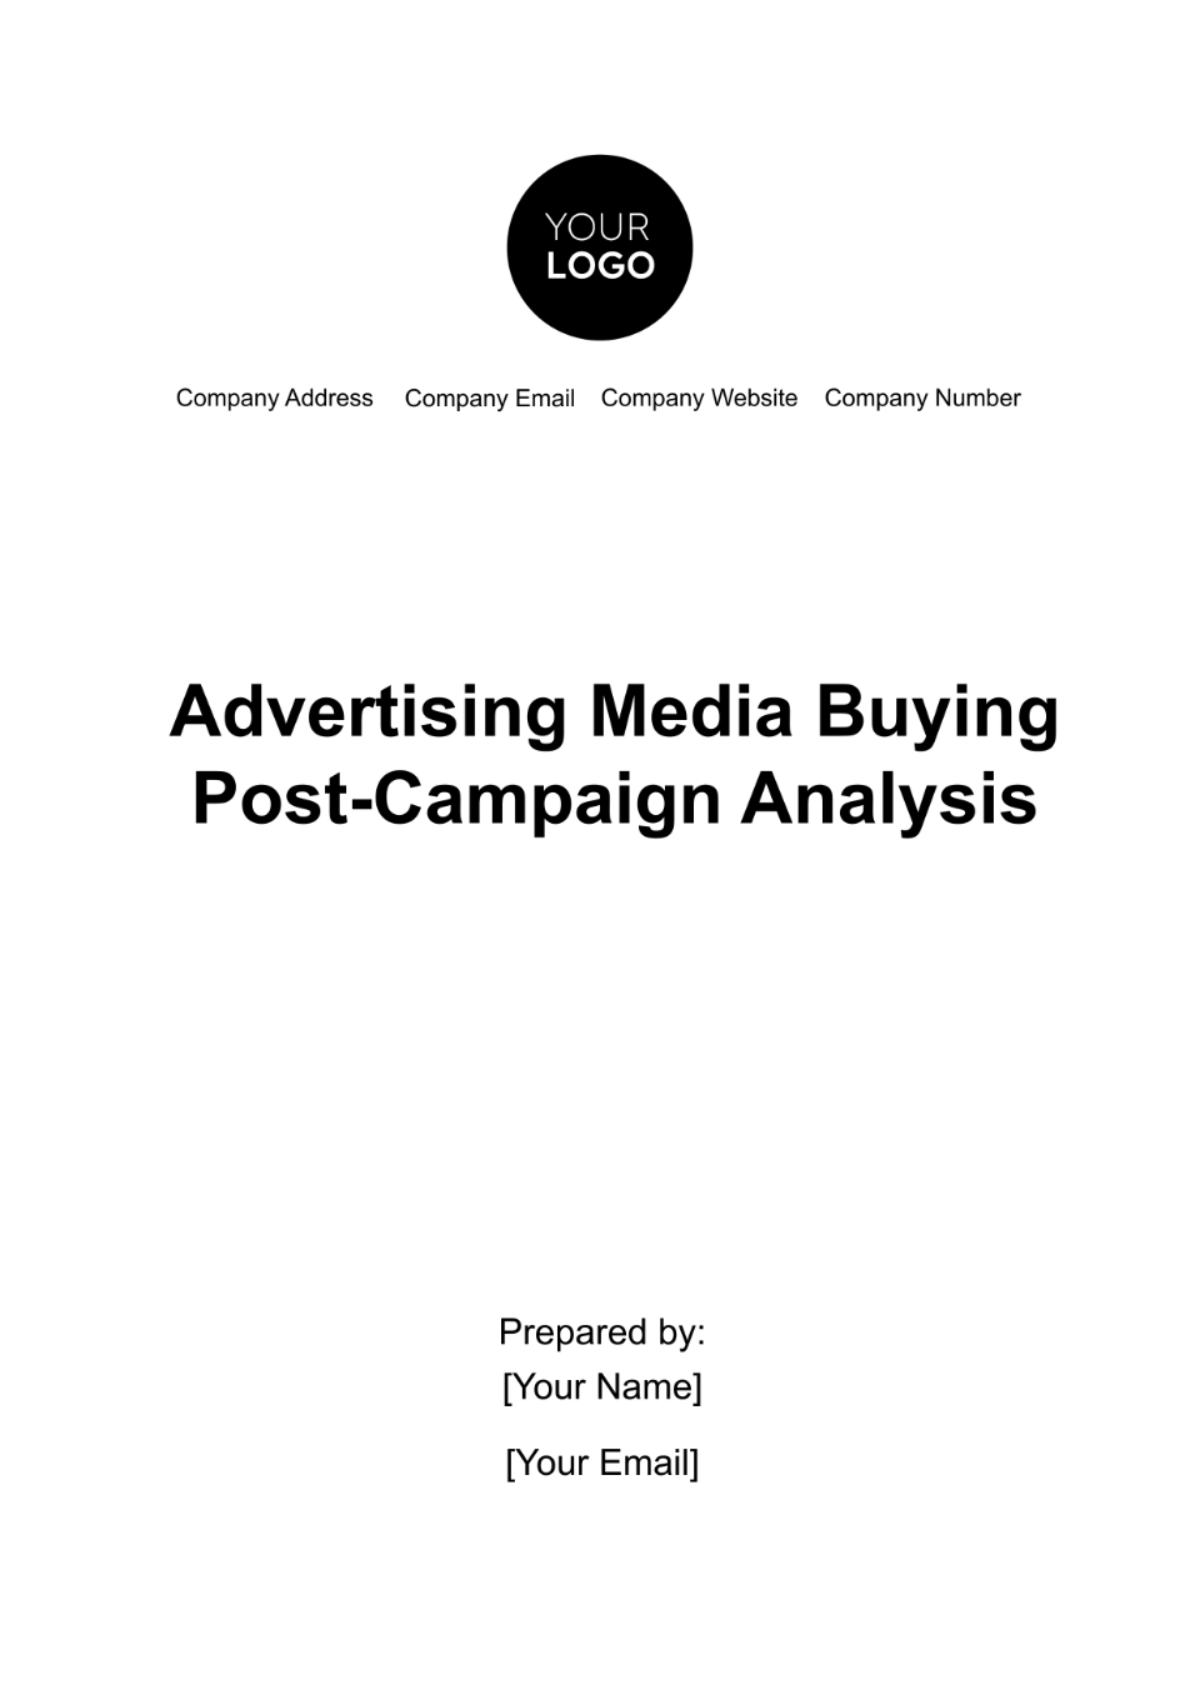 Free Advertising Media Buying Post-Campaign Analysis Template